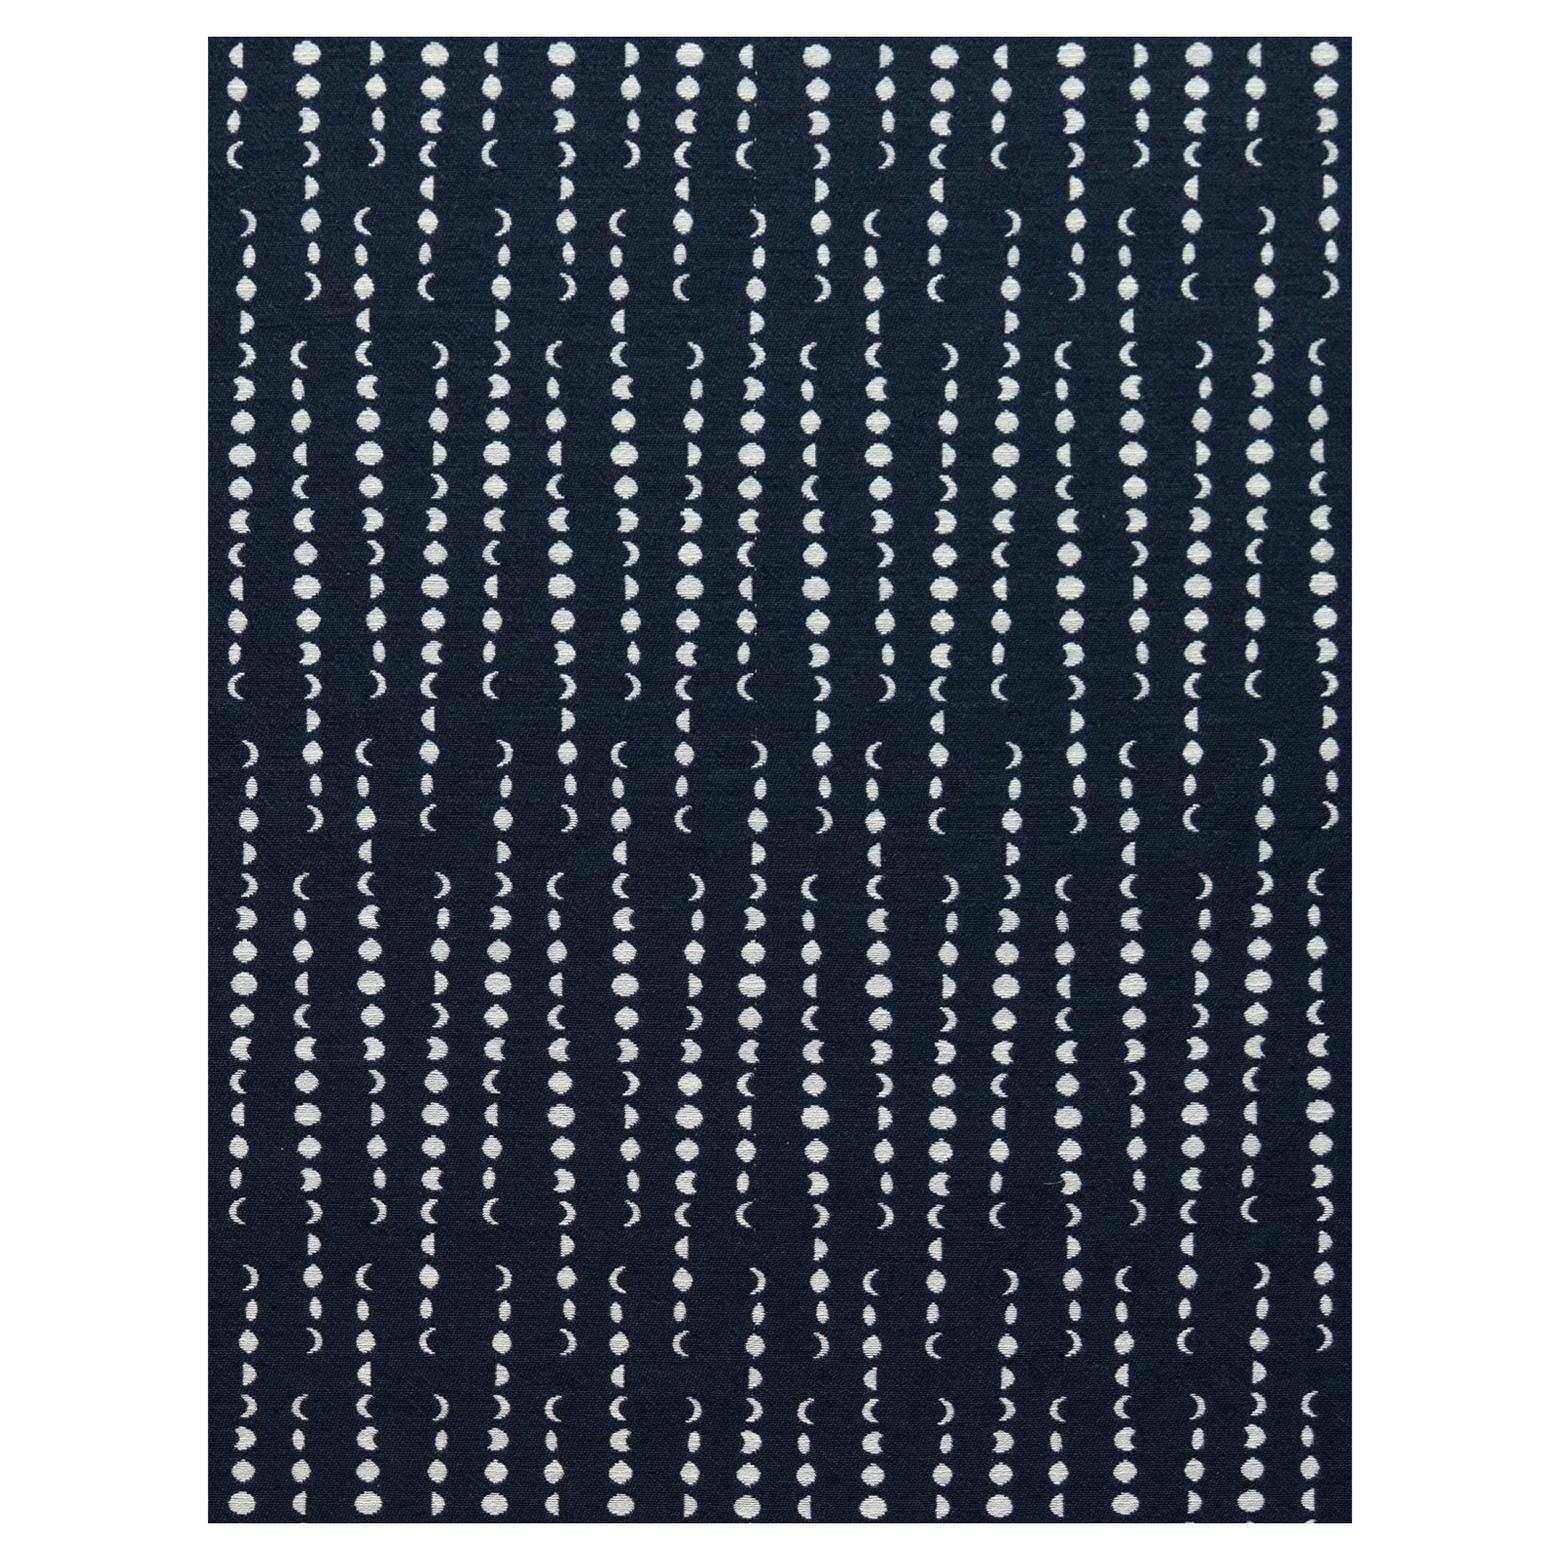 Earthlight Moon Woven Commercial Grade Fabric in Starr, White and Midnight Blue For Sale